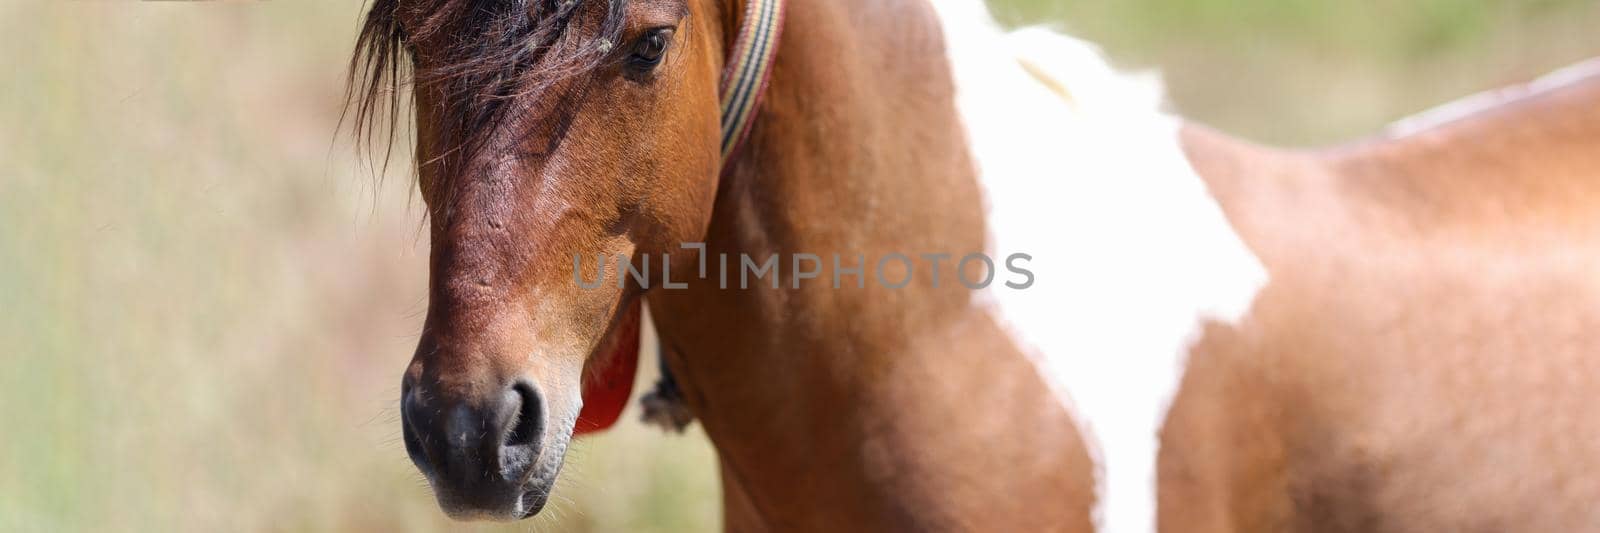 Closeup of muzzle of brown white horse with long mane. Hobby horse breeding concept